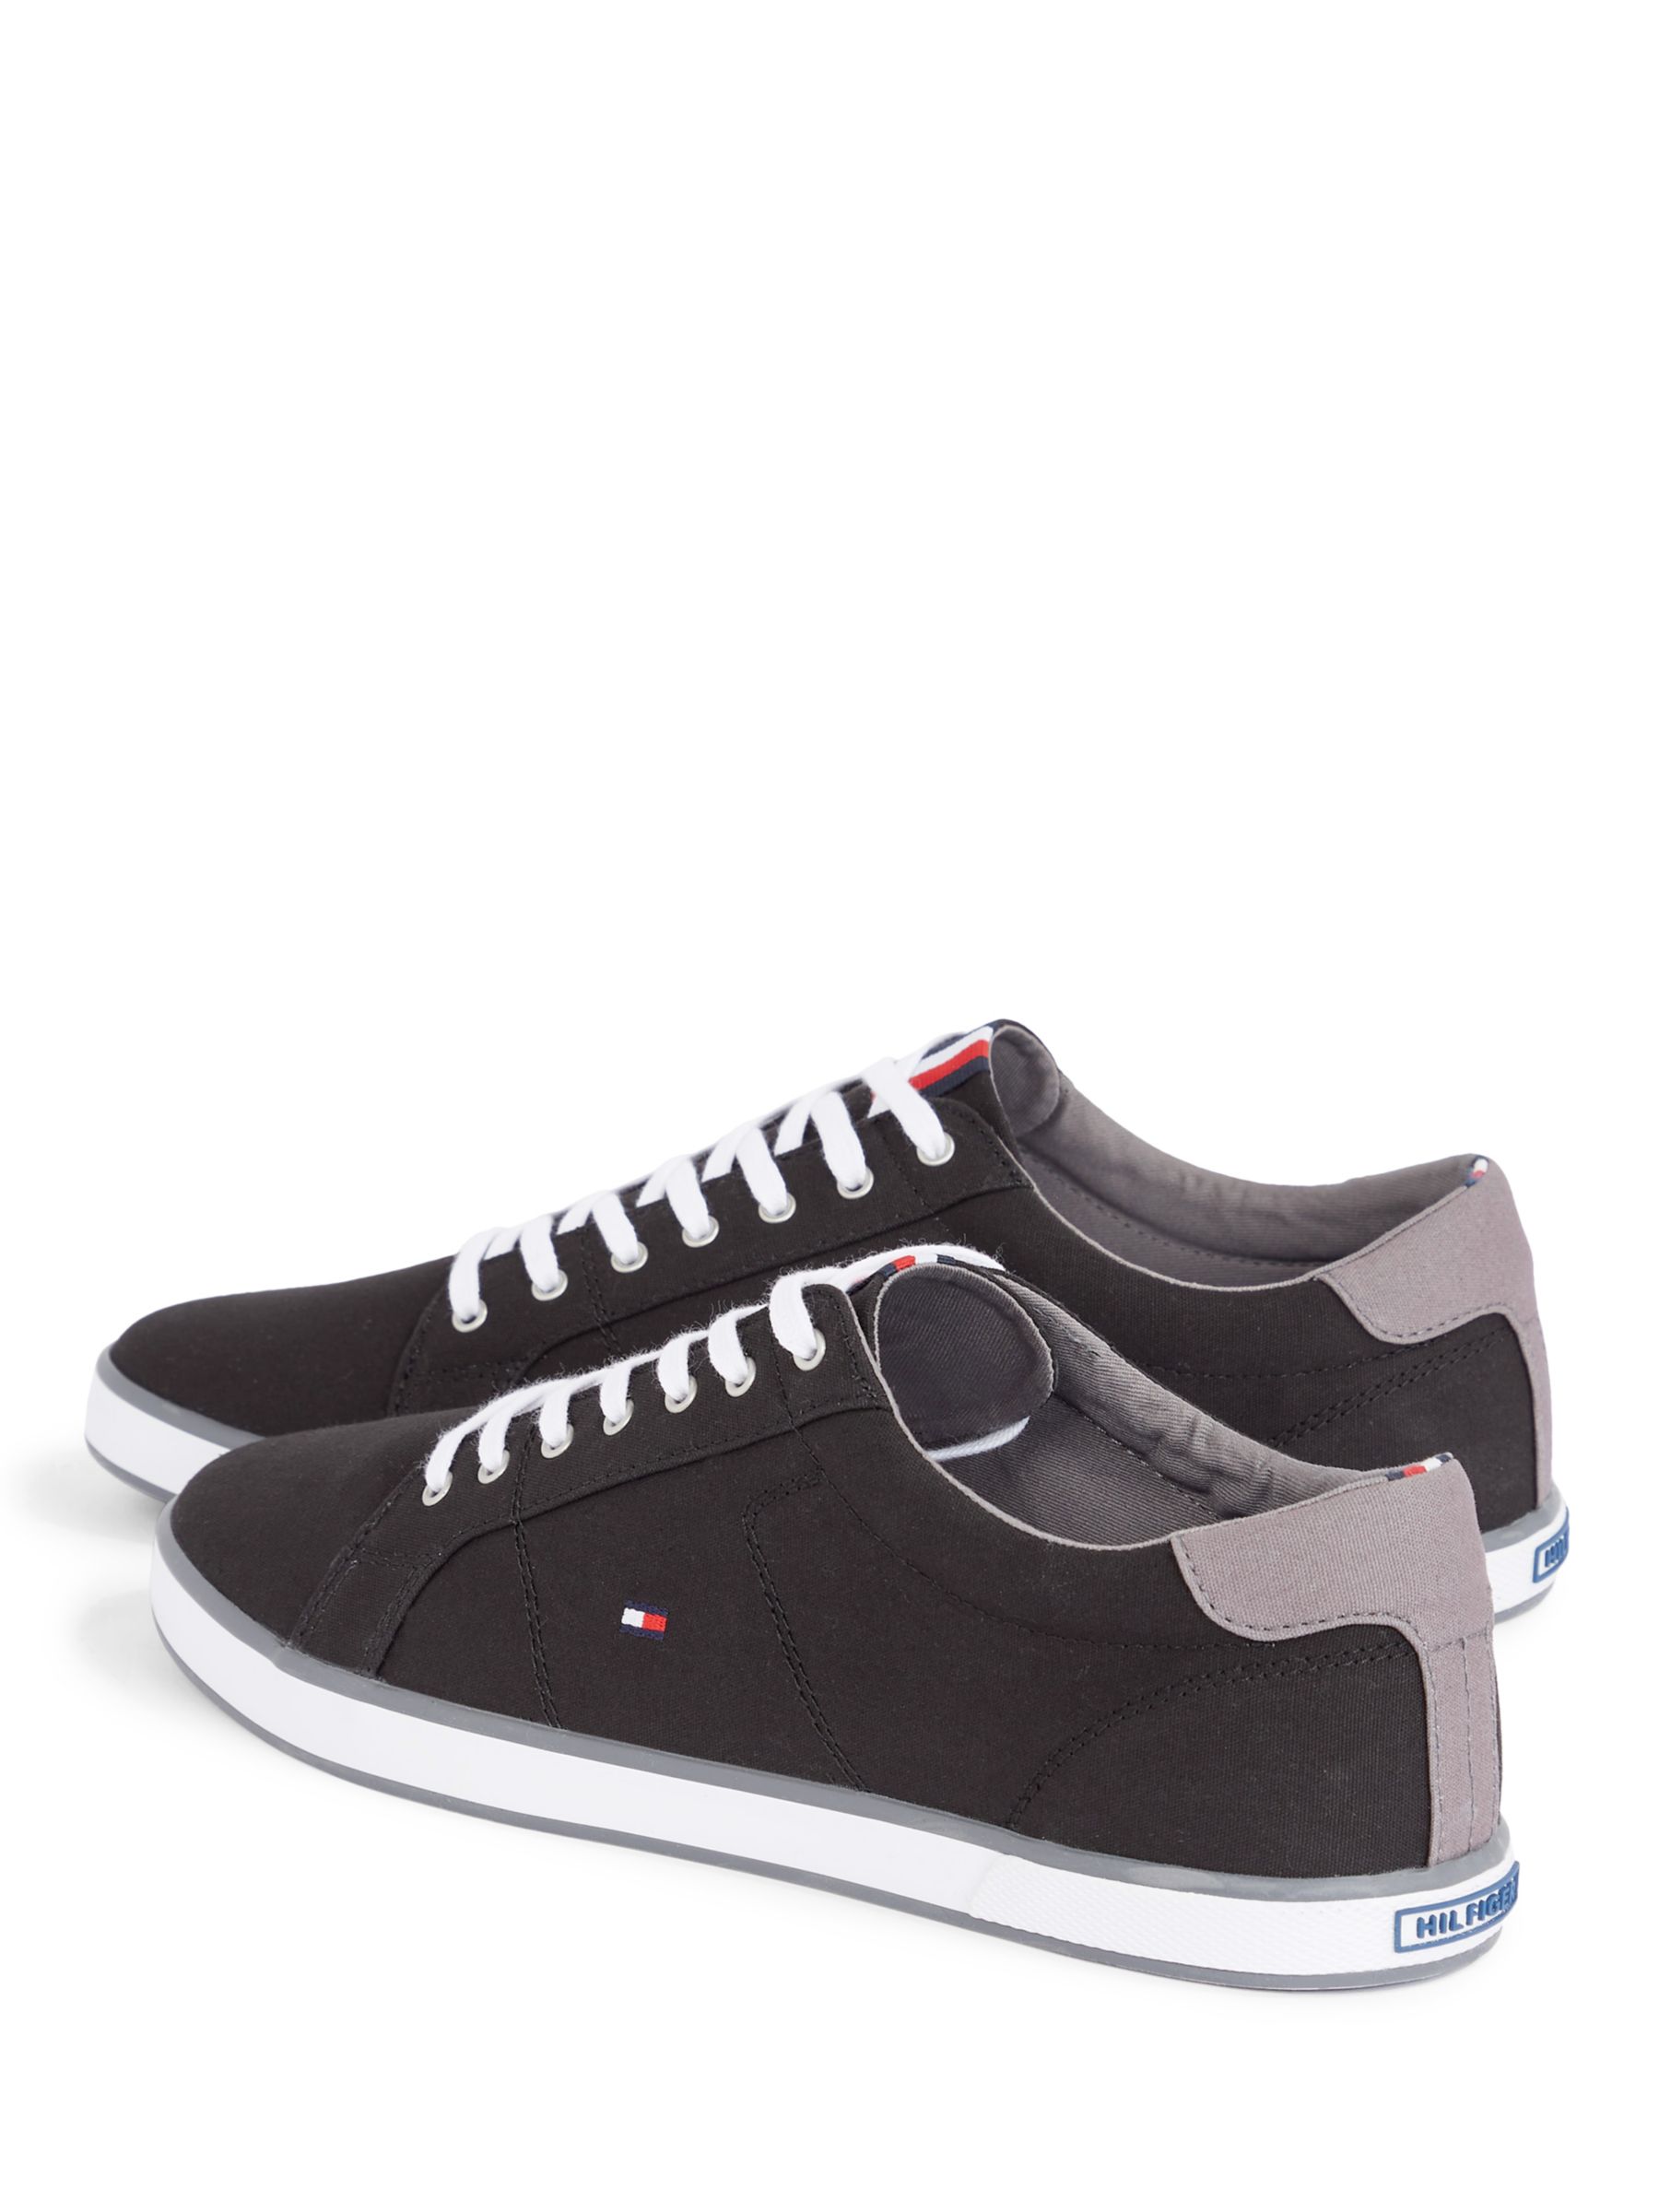 Tommy Hilfiger Canvas Lace-Up Trainers, Black, 6